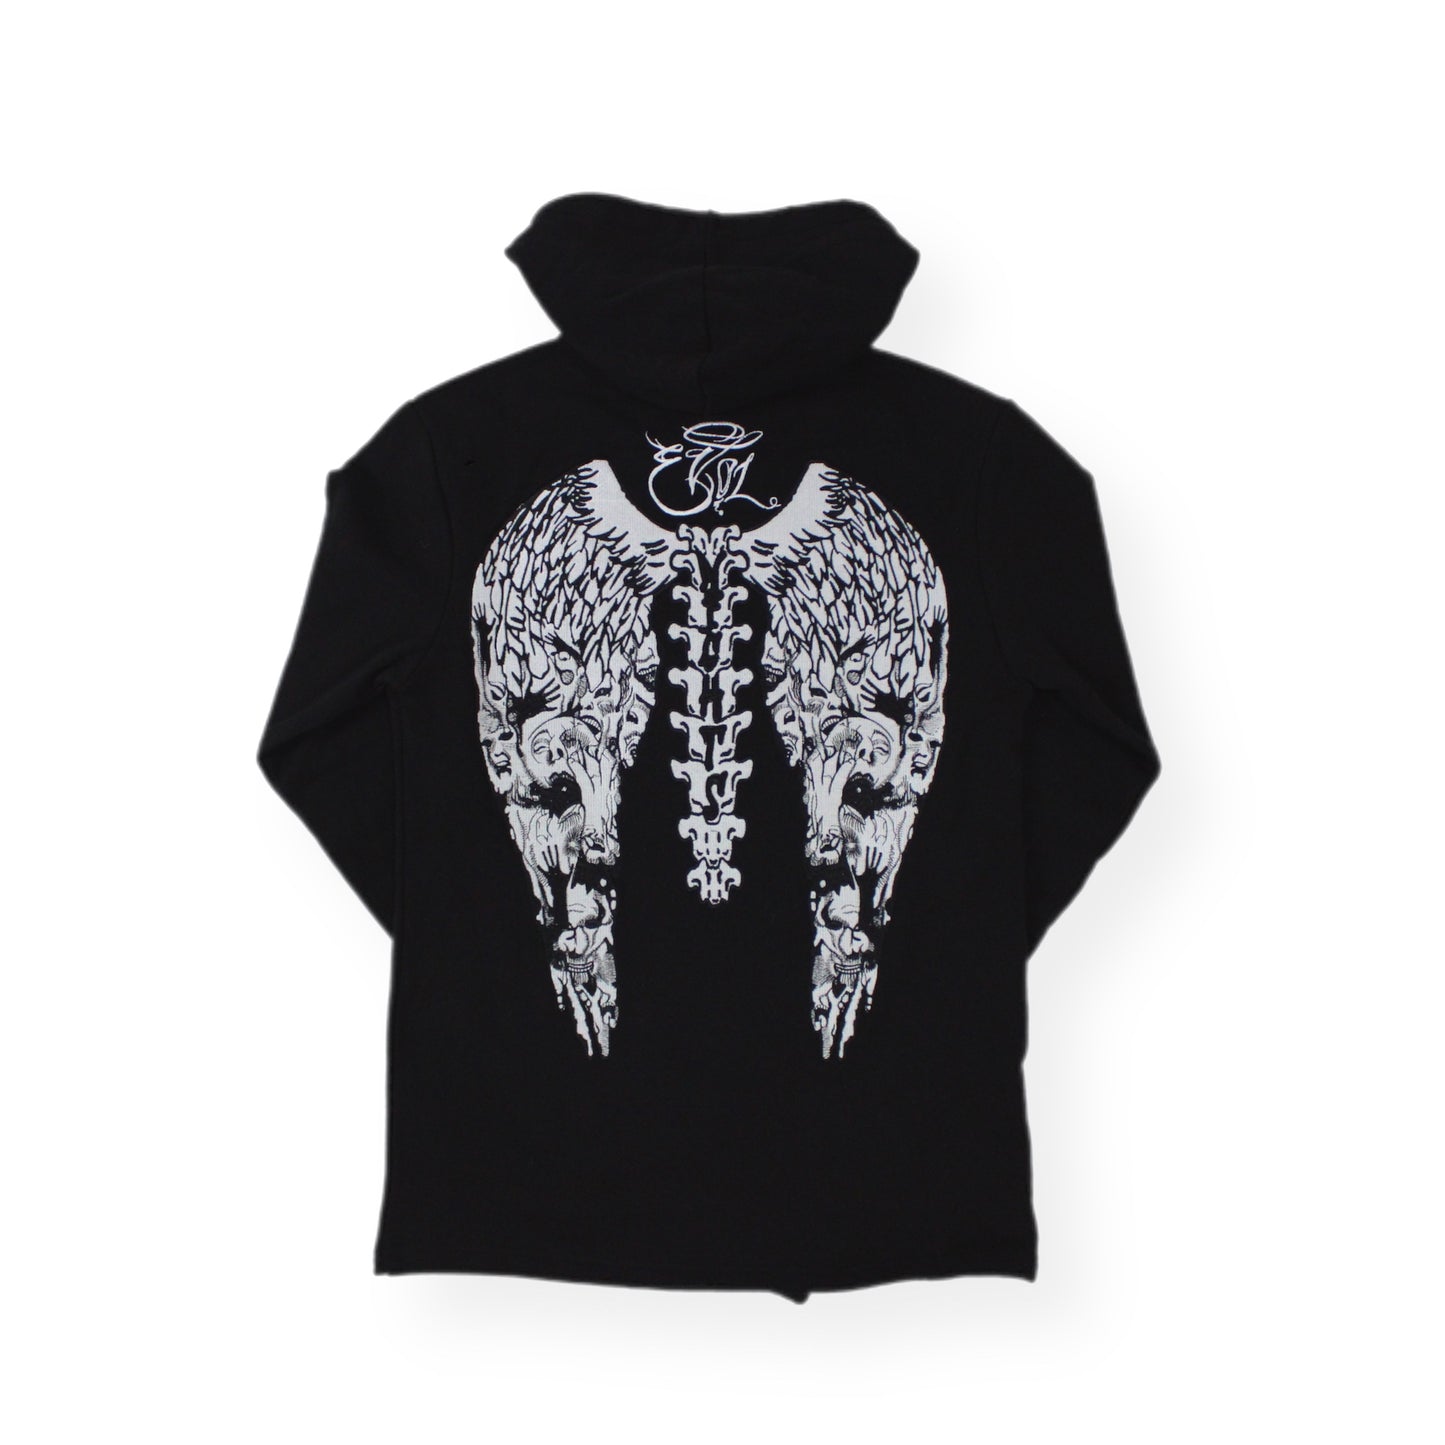 EVOL NIGHTS Trapped Soul Hoodie Black and Grey